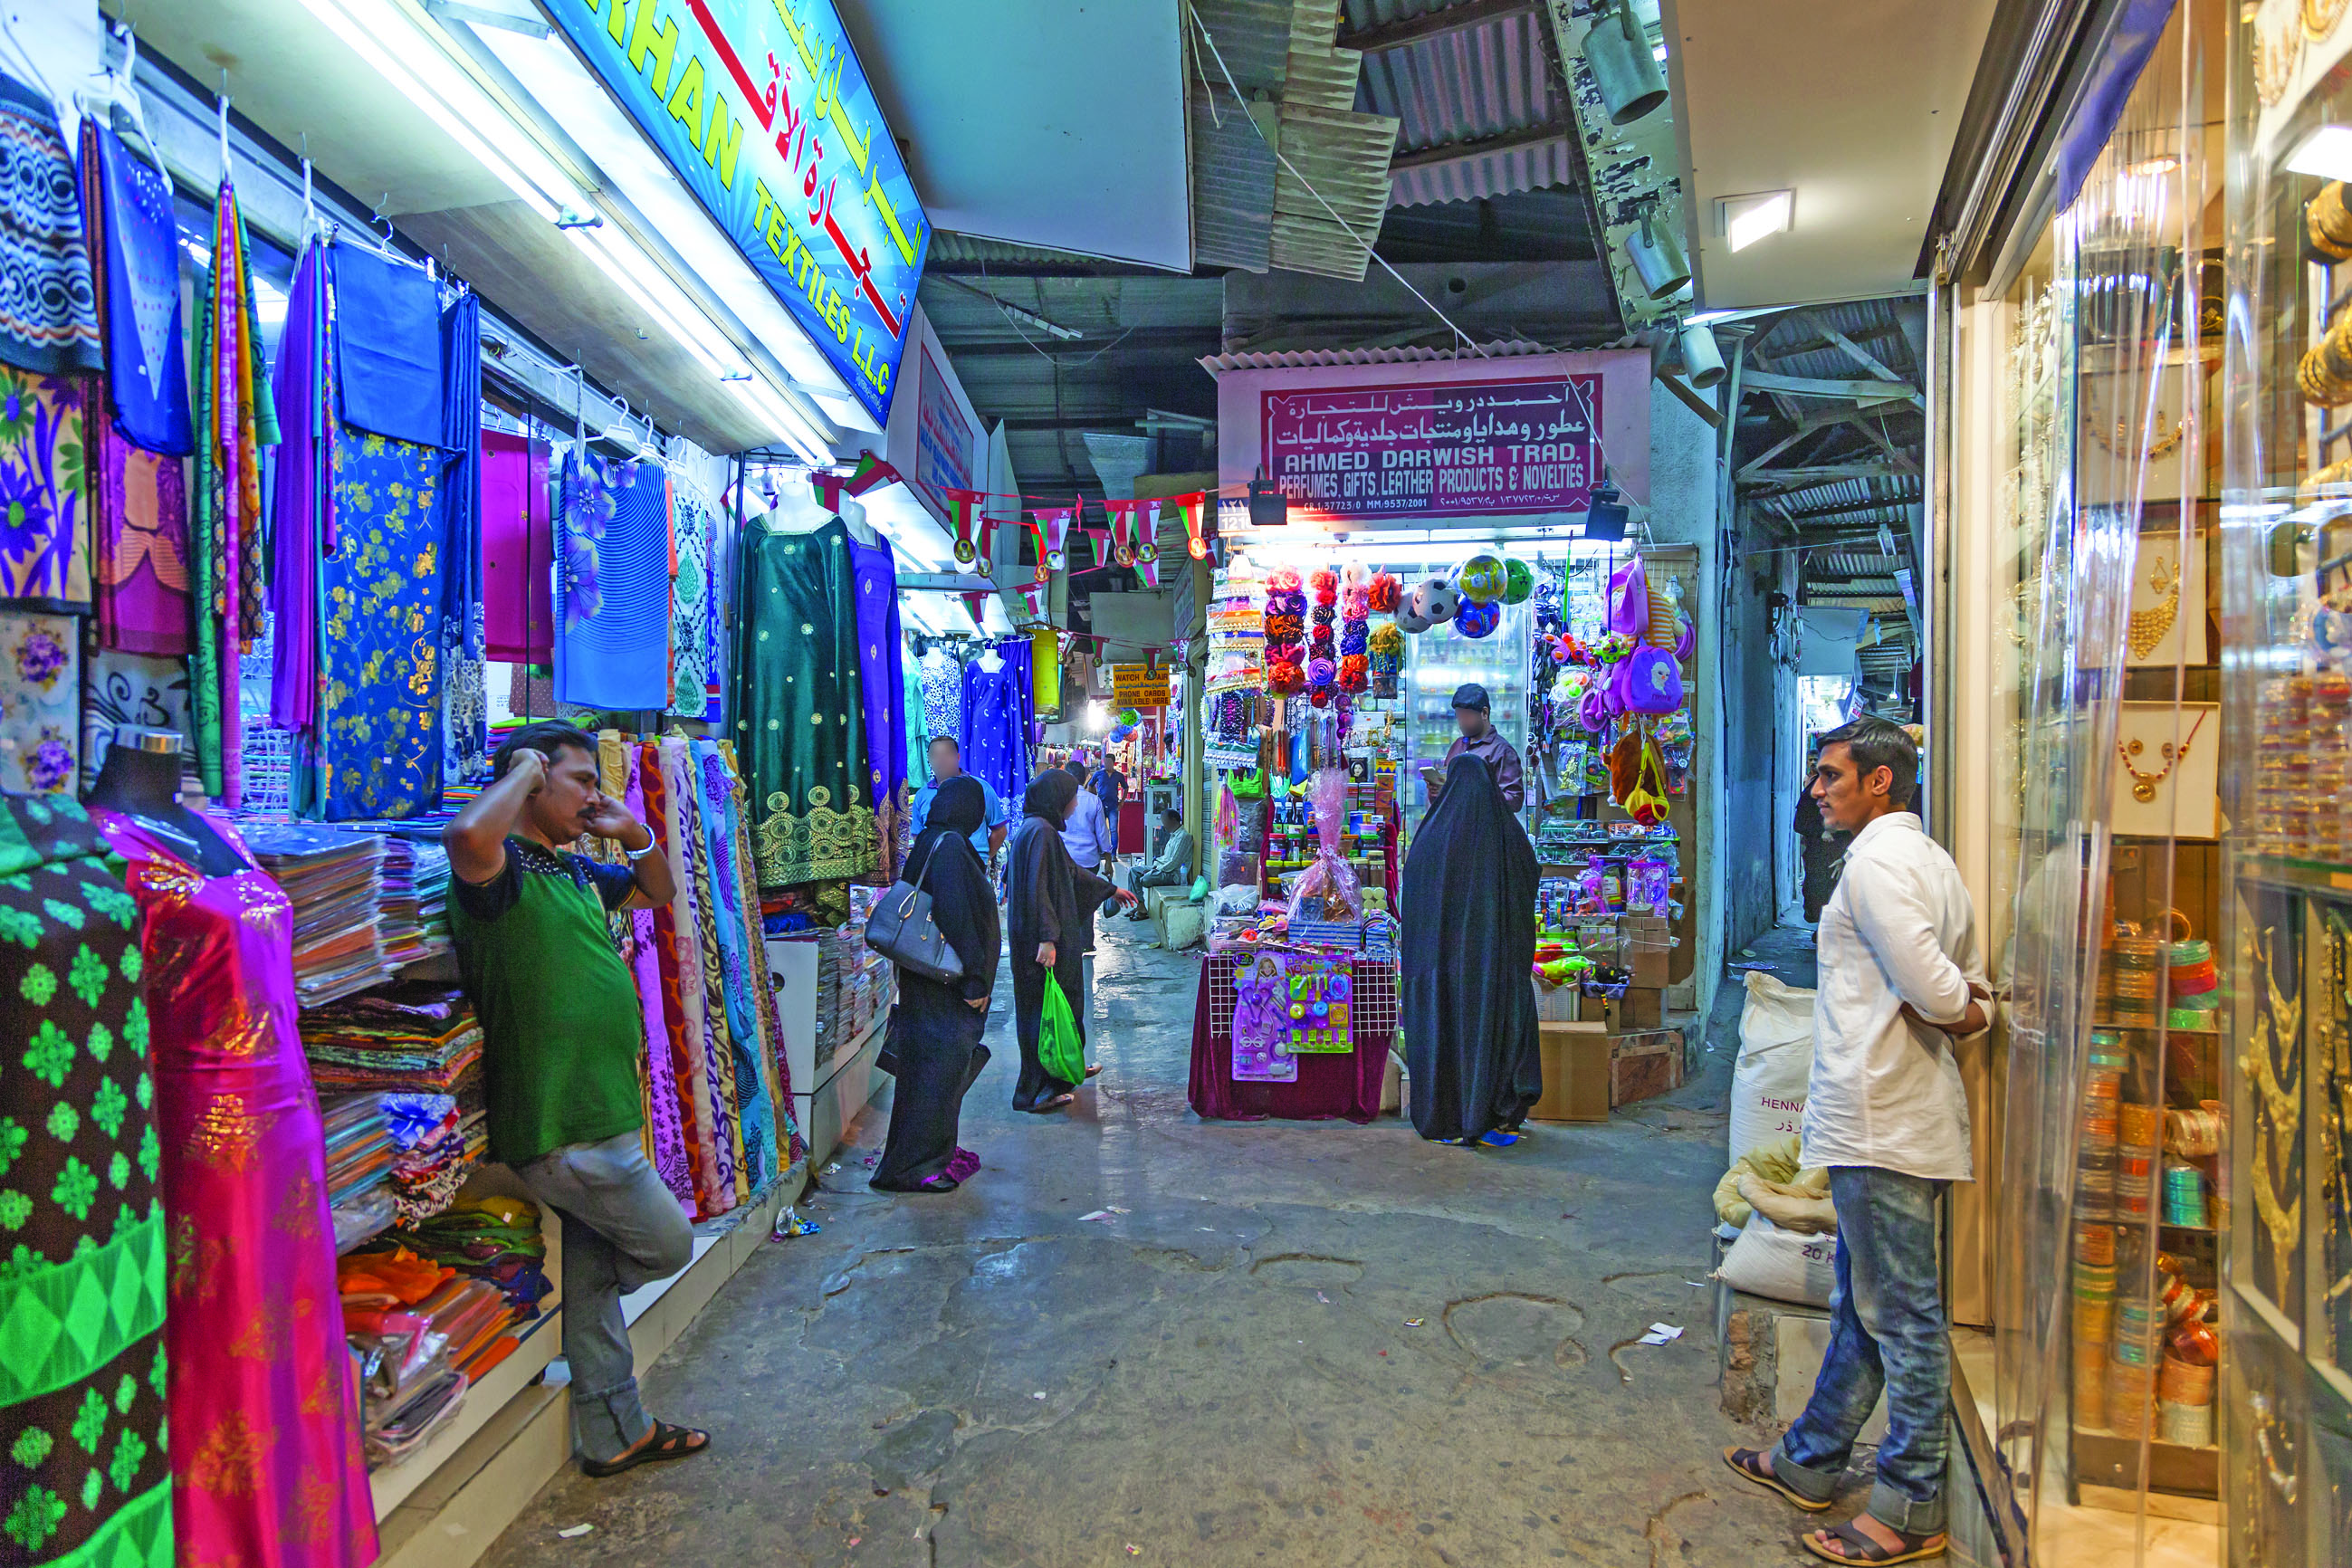 ‘Lower our rents’ plea by Oman traders in tough market